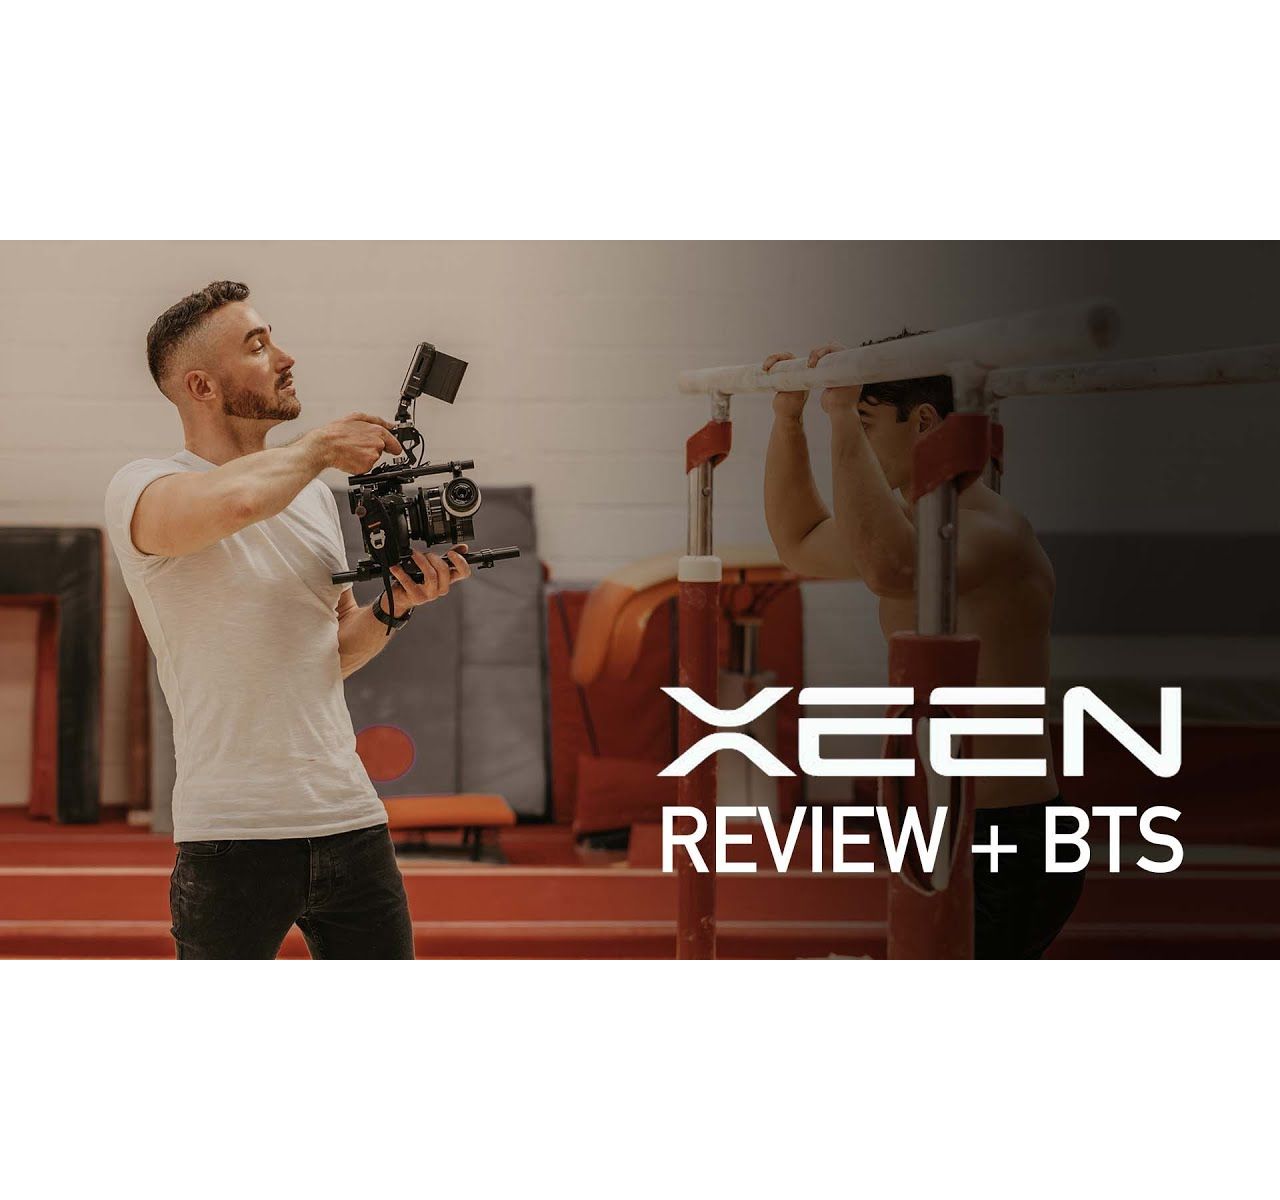 XEEN CF - My Next Gear Purchase! Behind The Scenes & Review of the XEEN CF Cine Prime Set